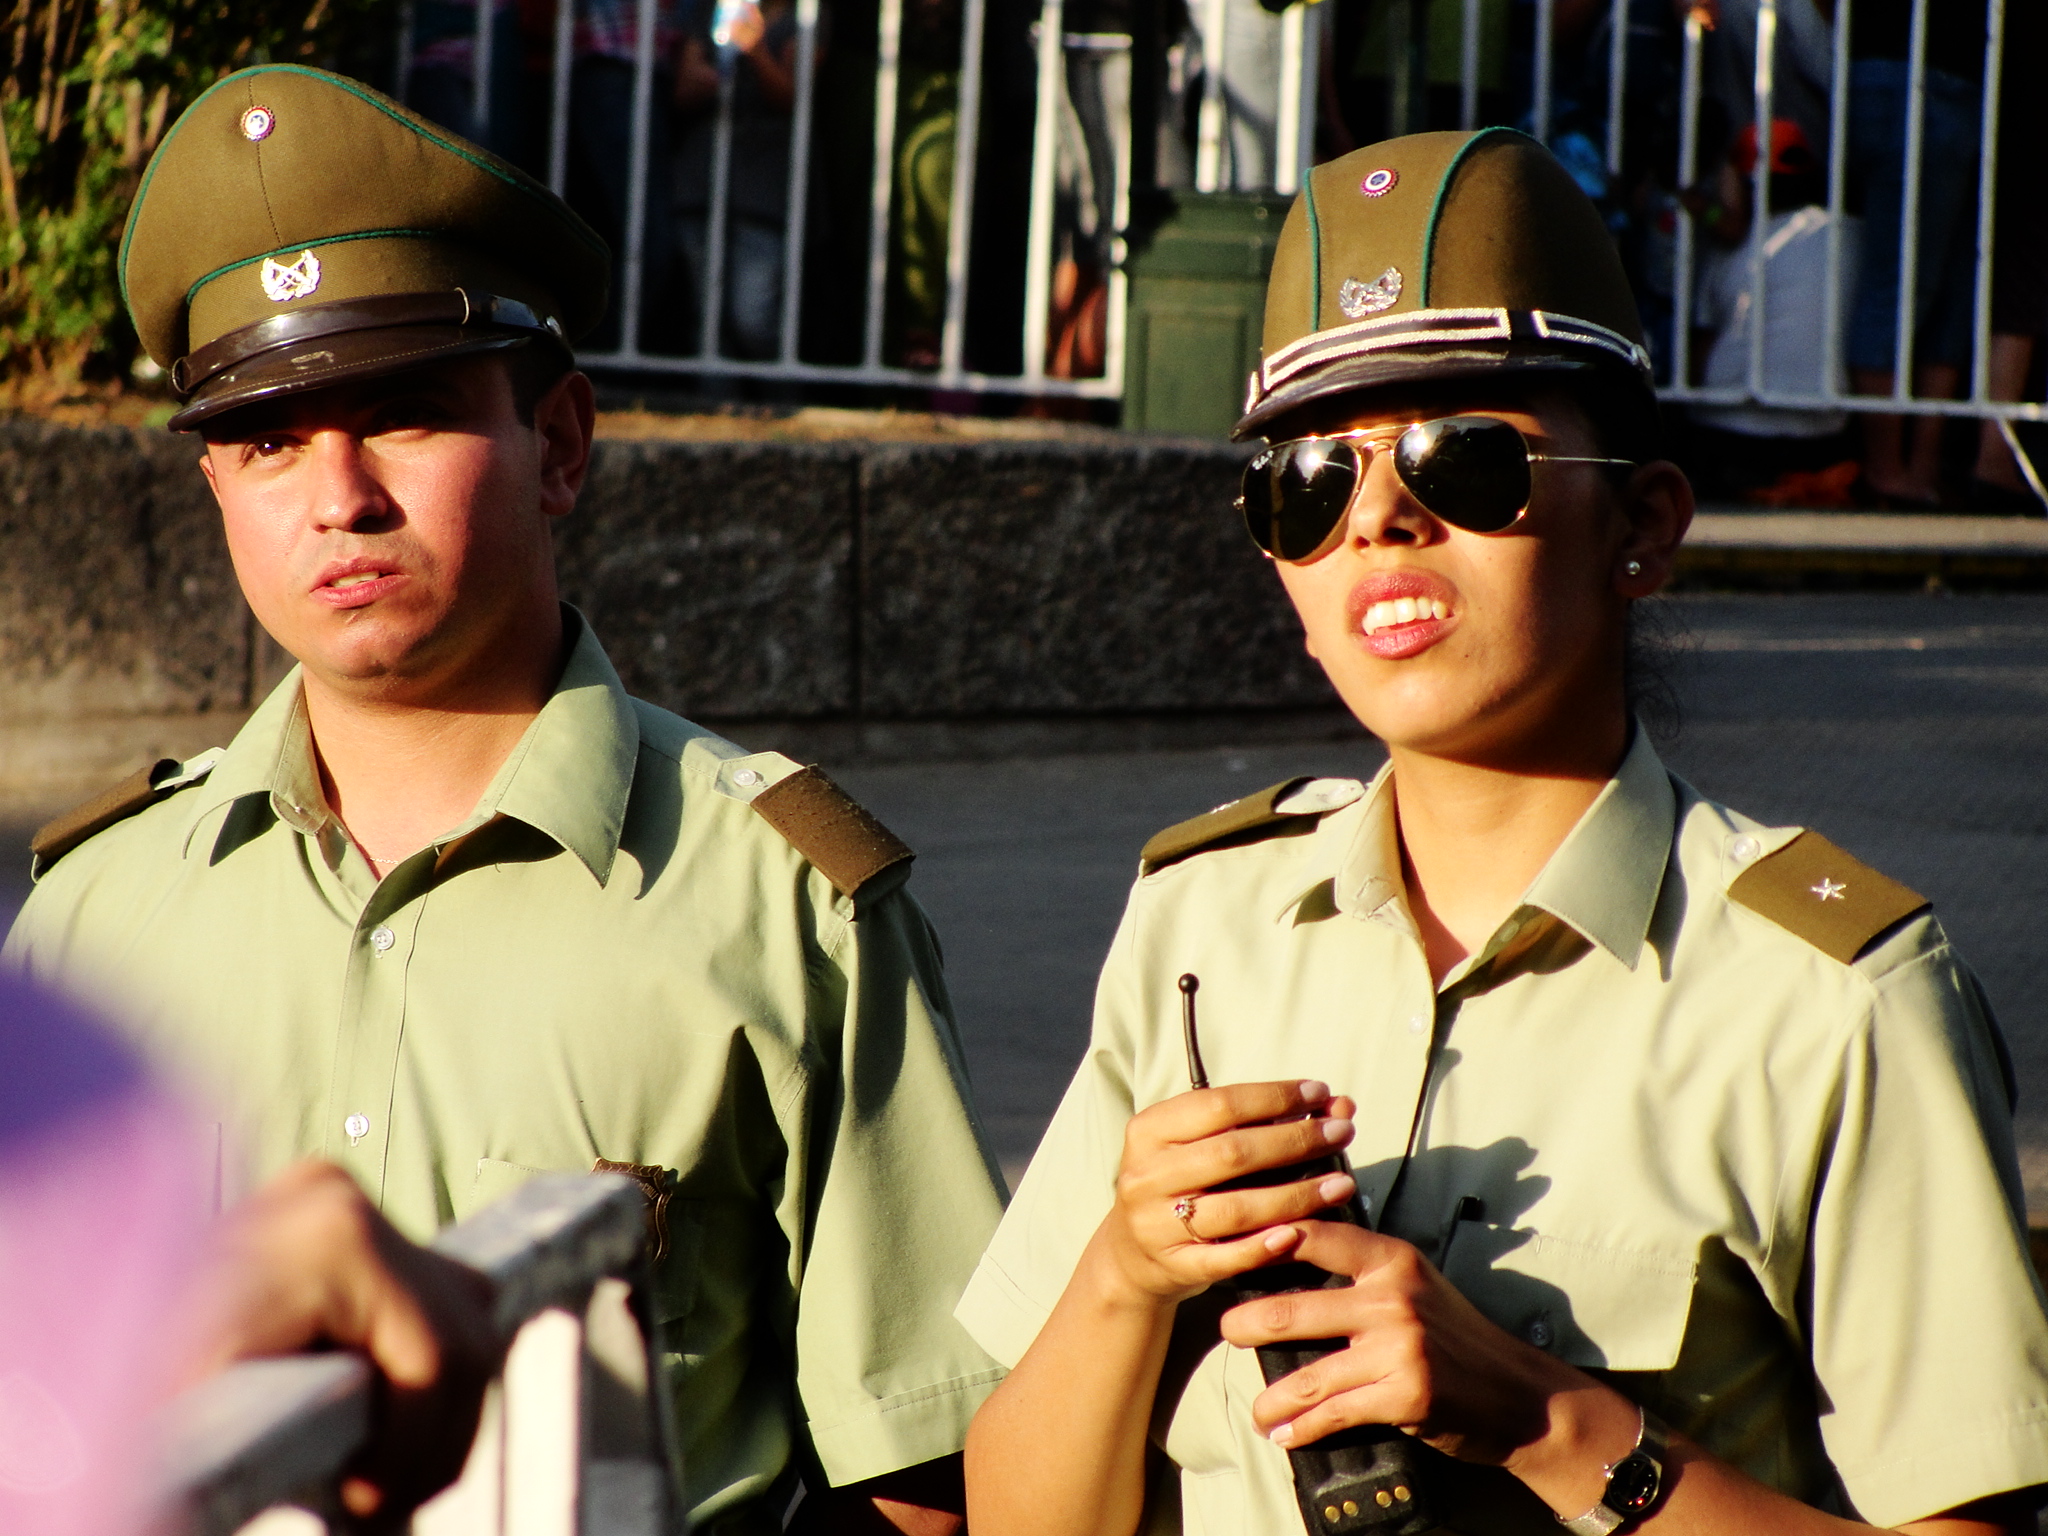 two people in uniform holding soing while looking at the camera